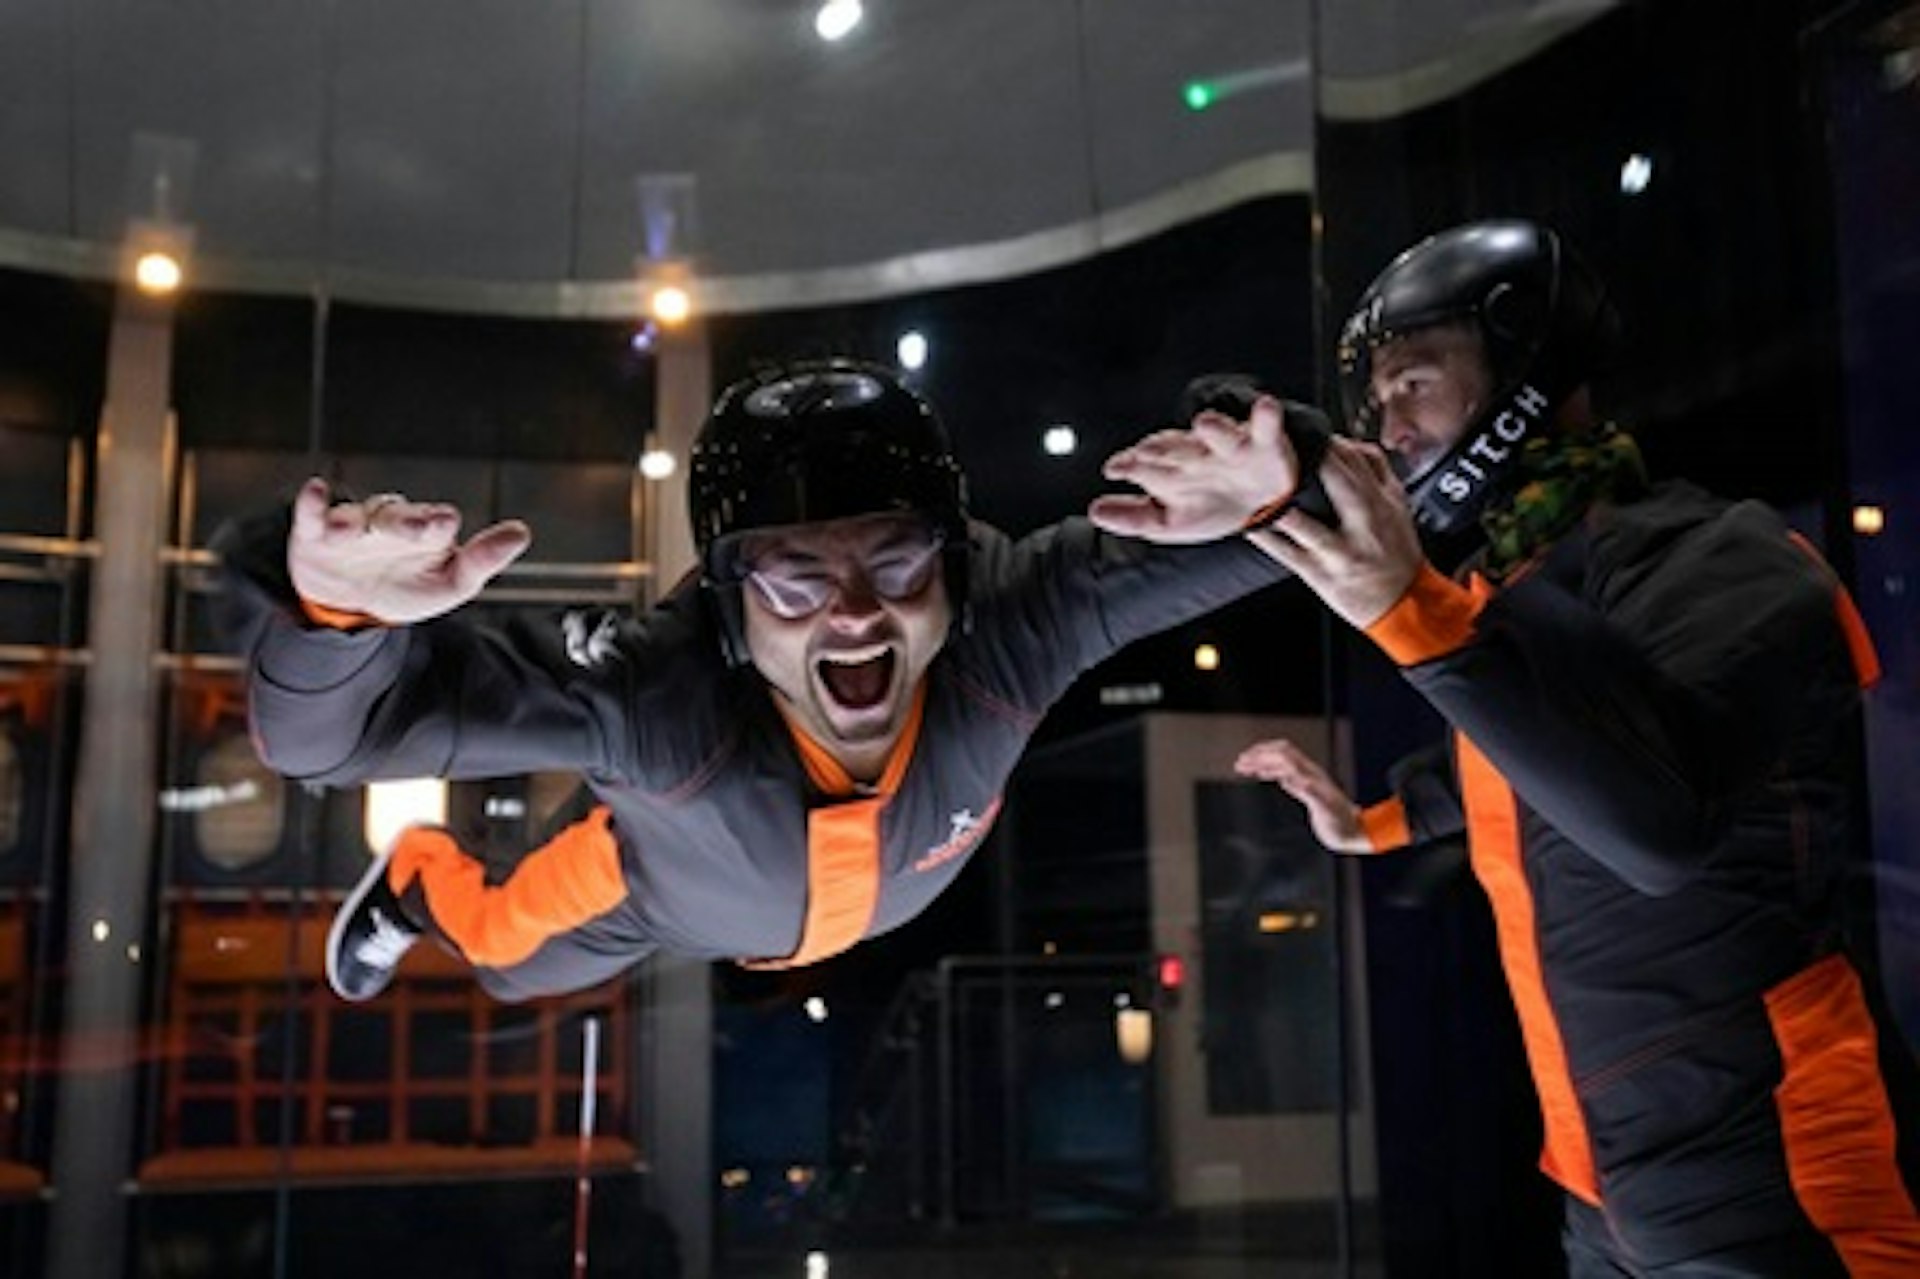 iFly Indoor Skydiving and Archery for Two at The Bear Grylls Adventure